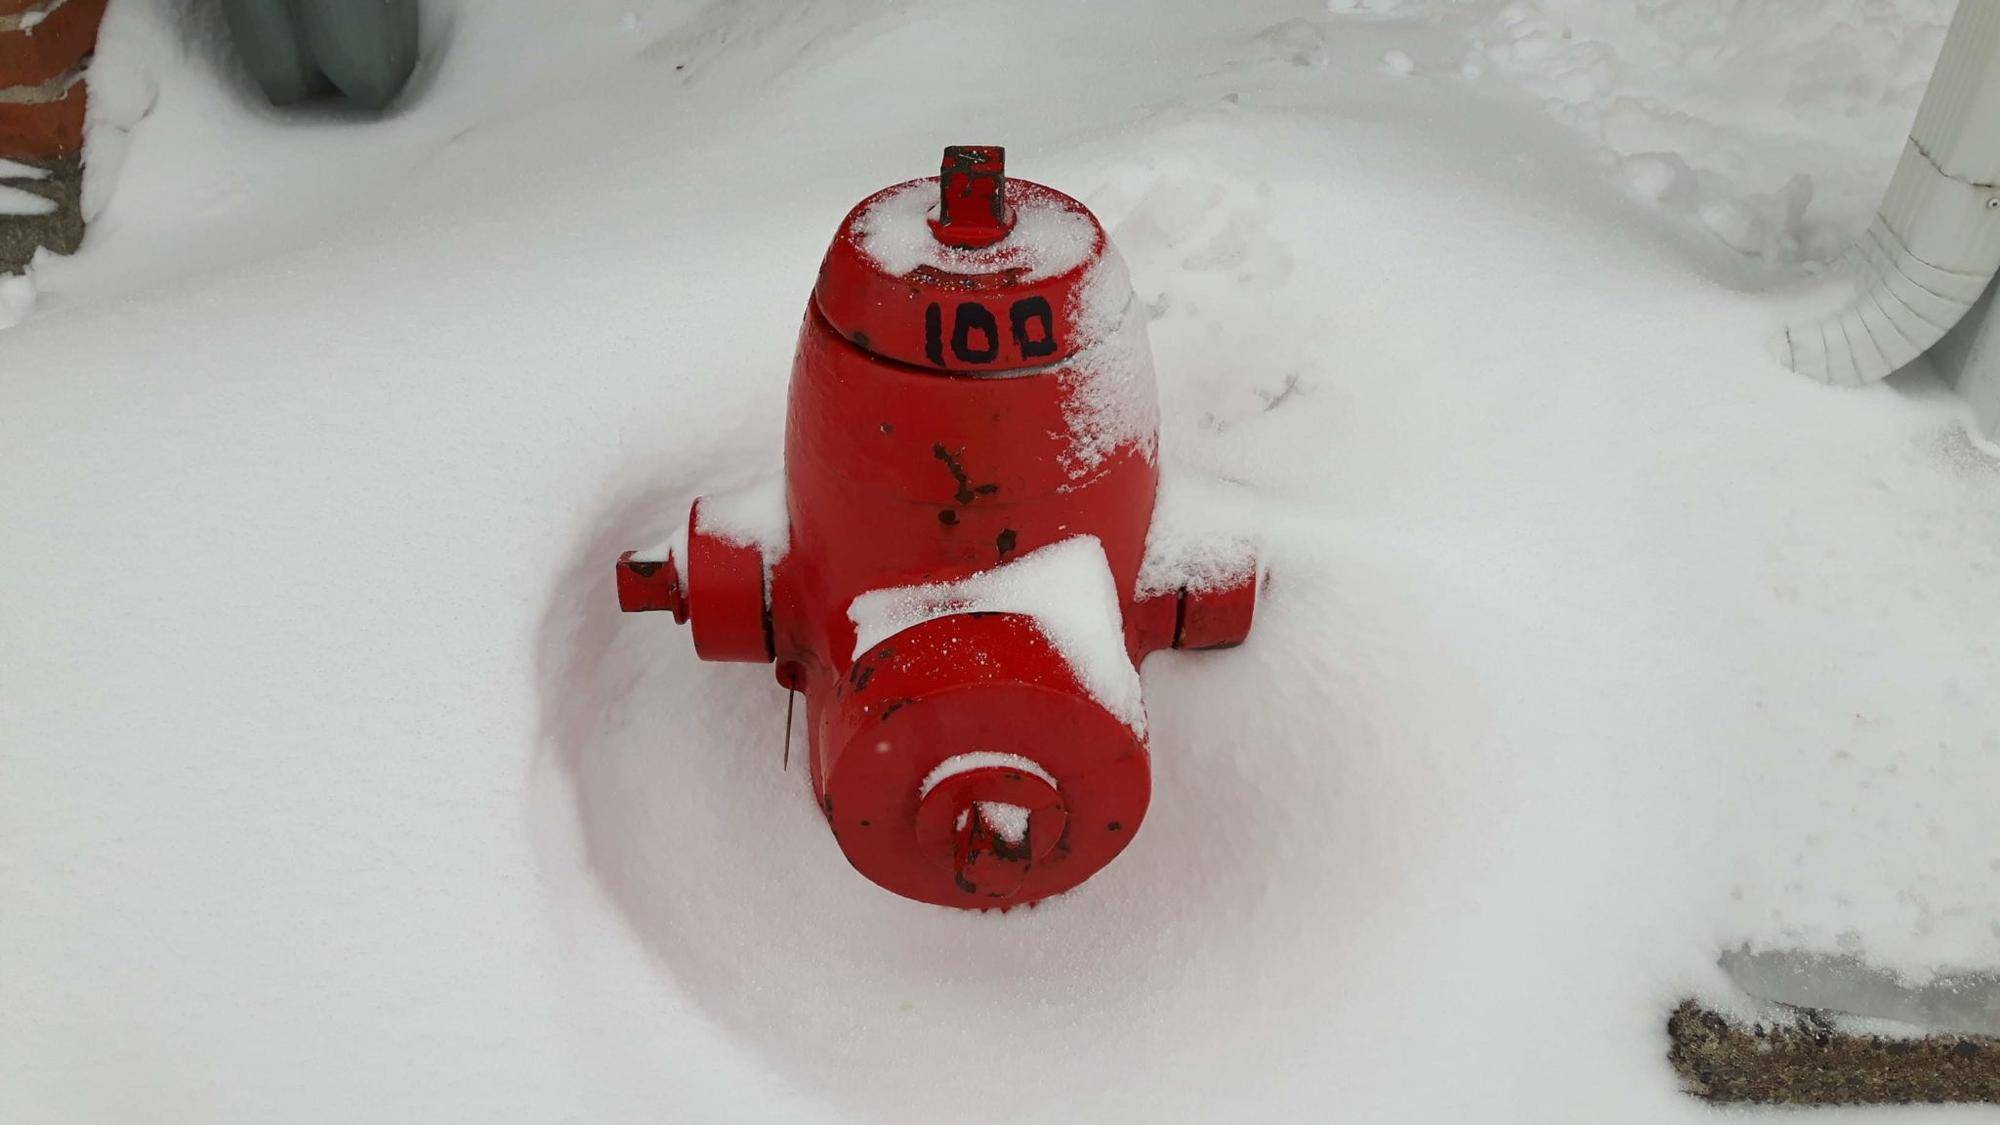 Municipalities are asking people to clear snow away from fire hydrants